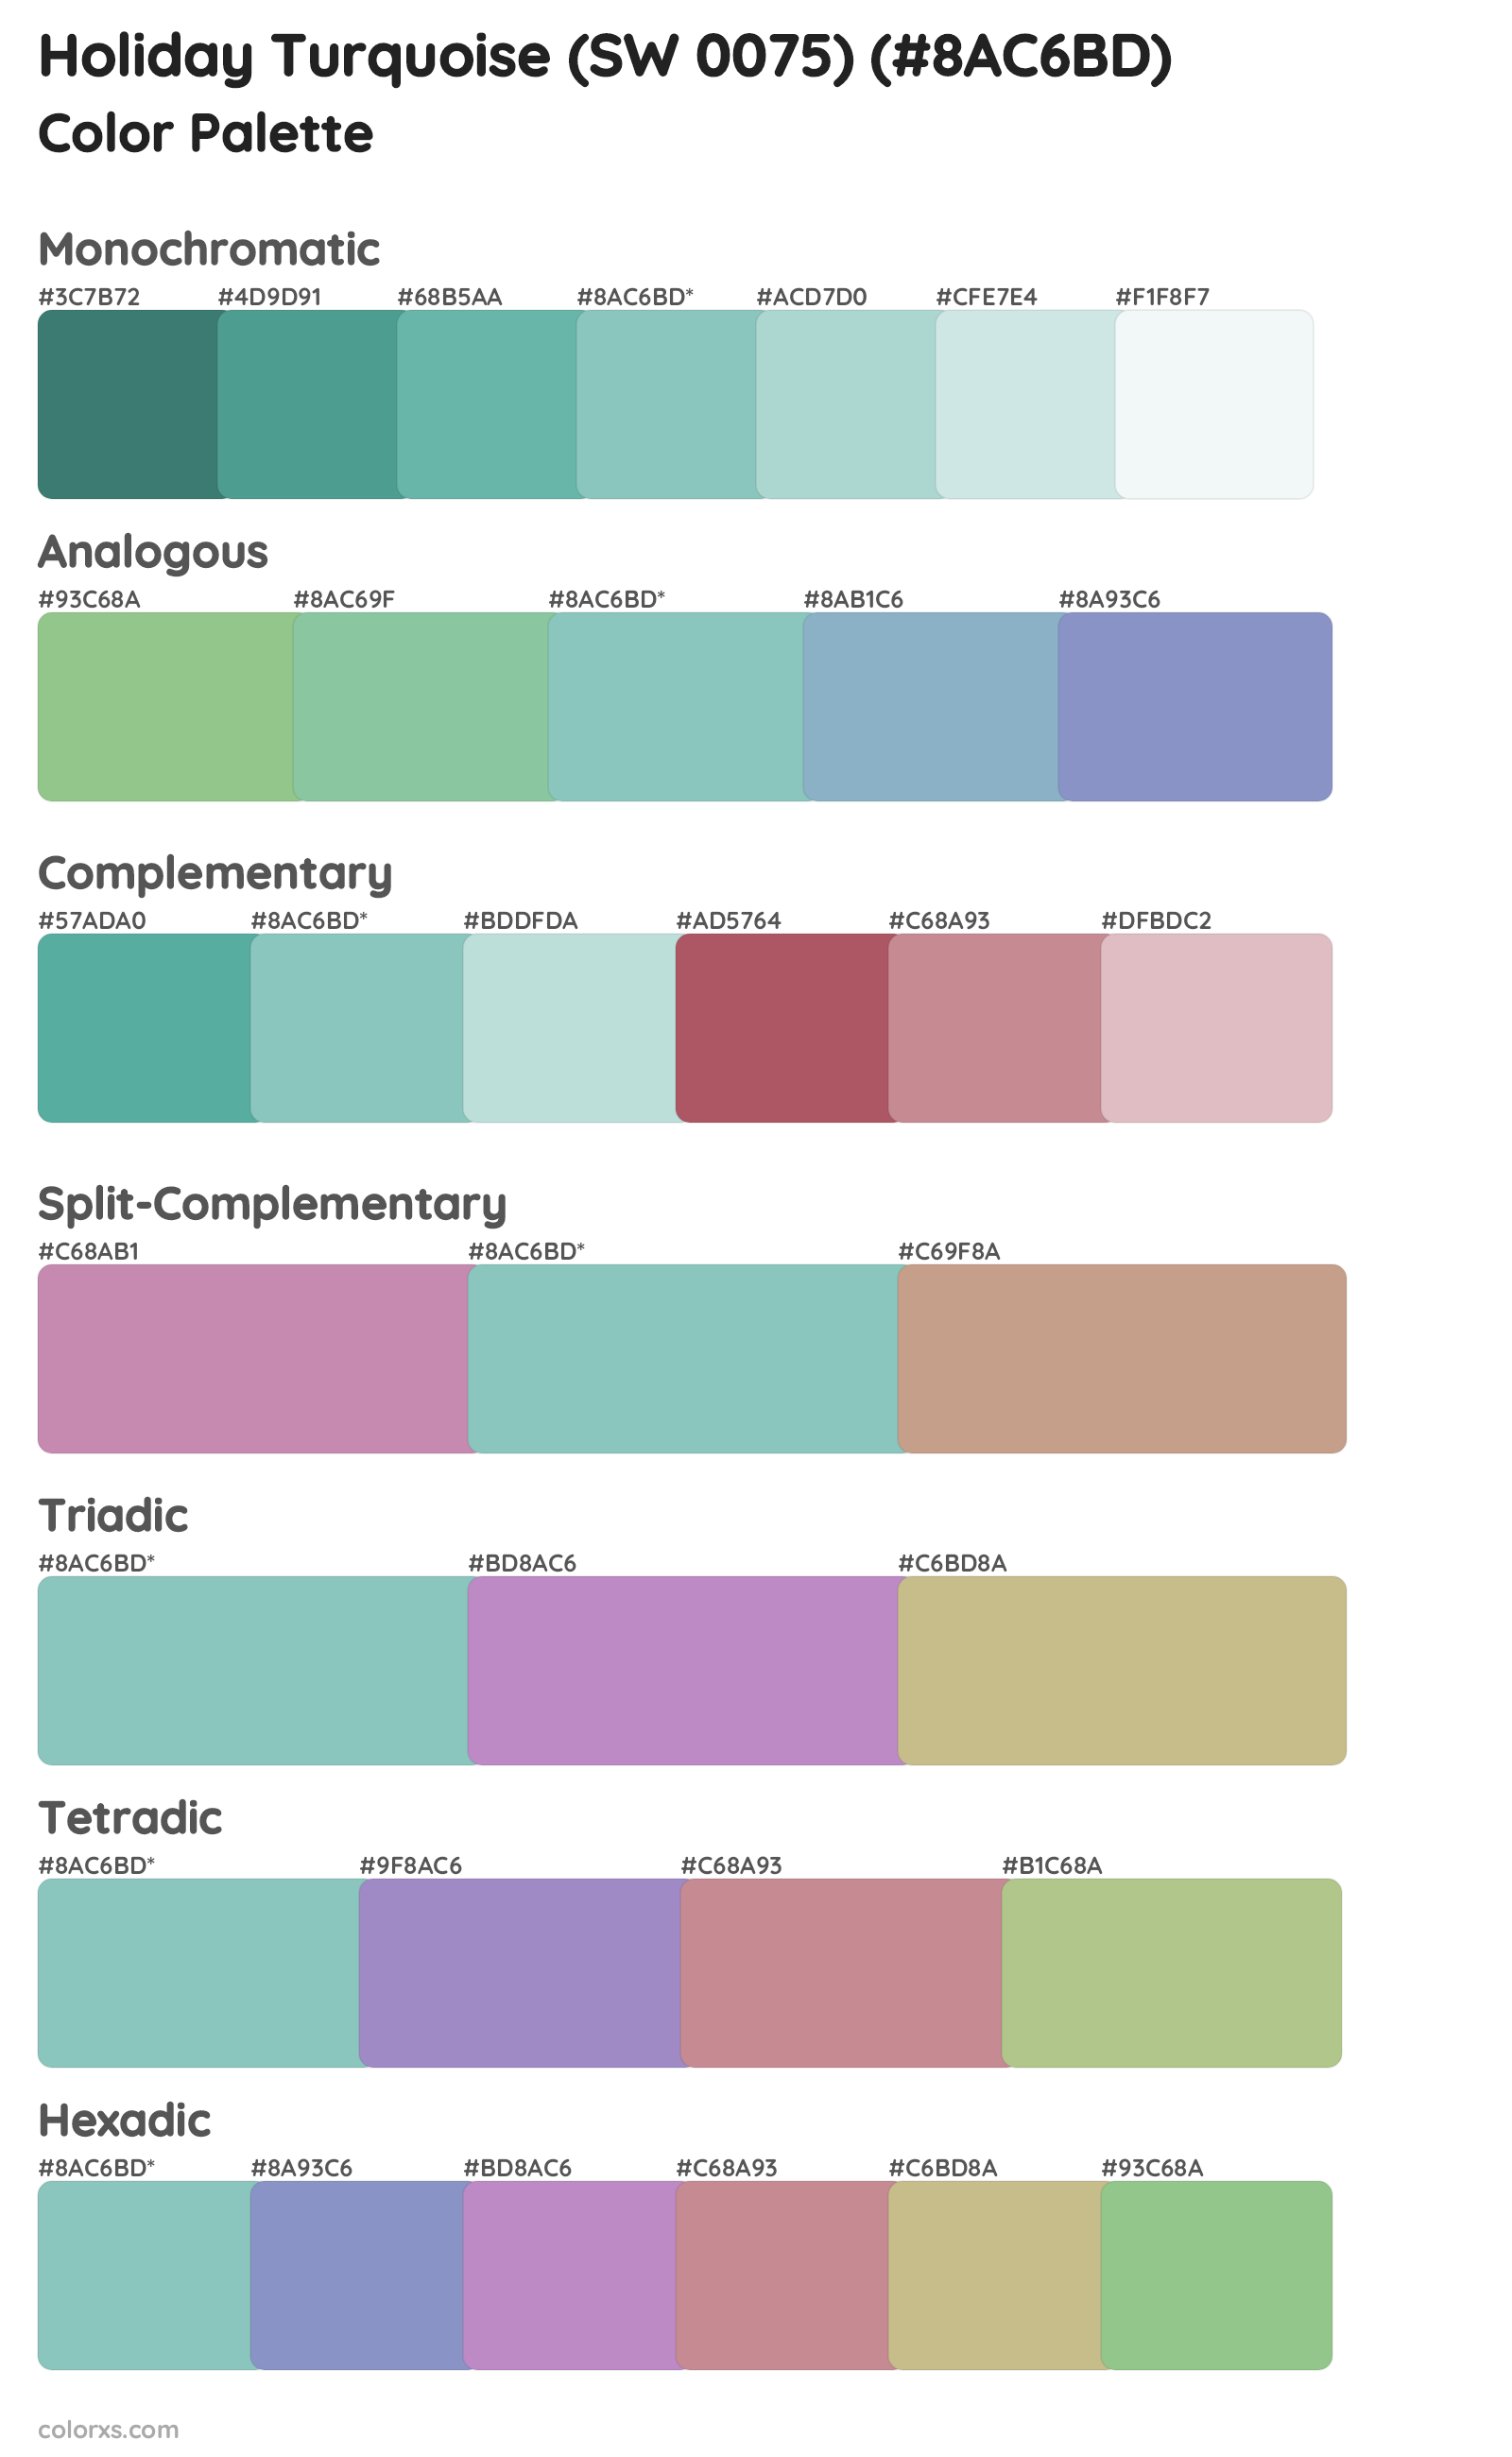 Holiday Turquoise (SW 0075) Color Scheme Palettes